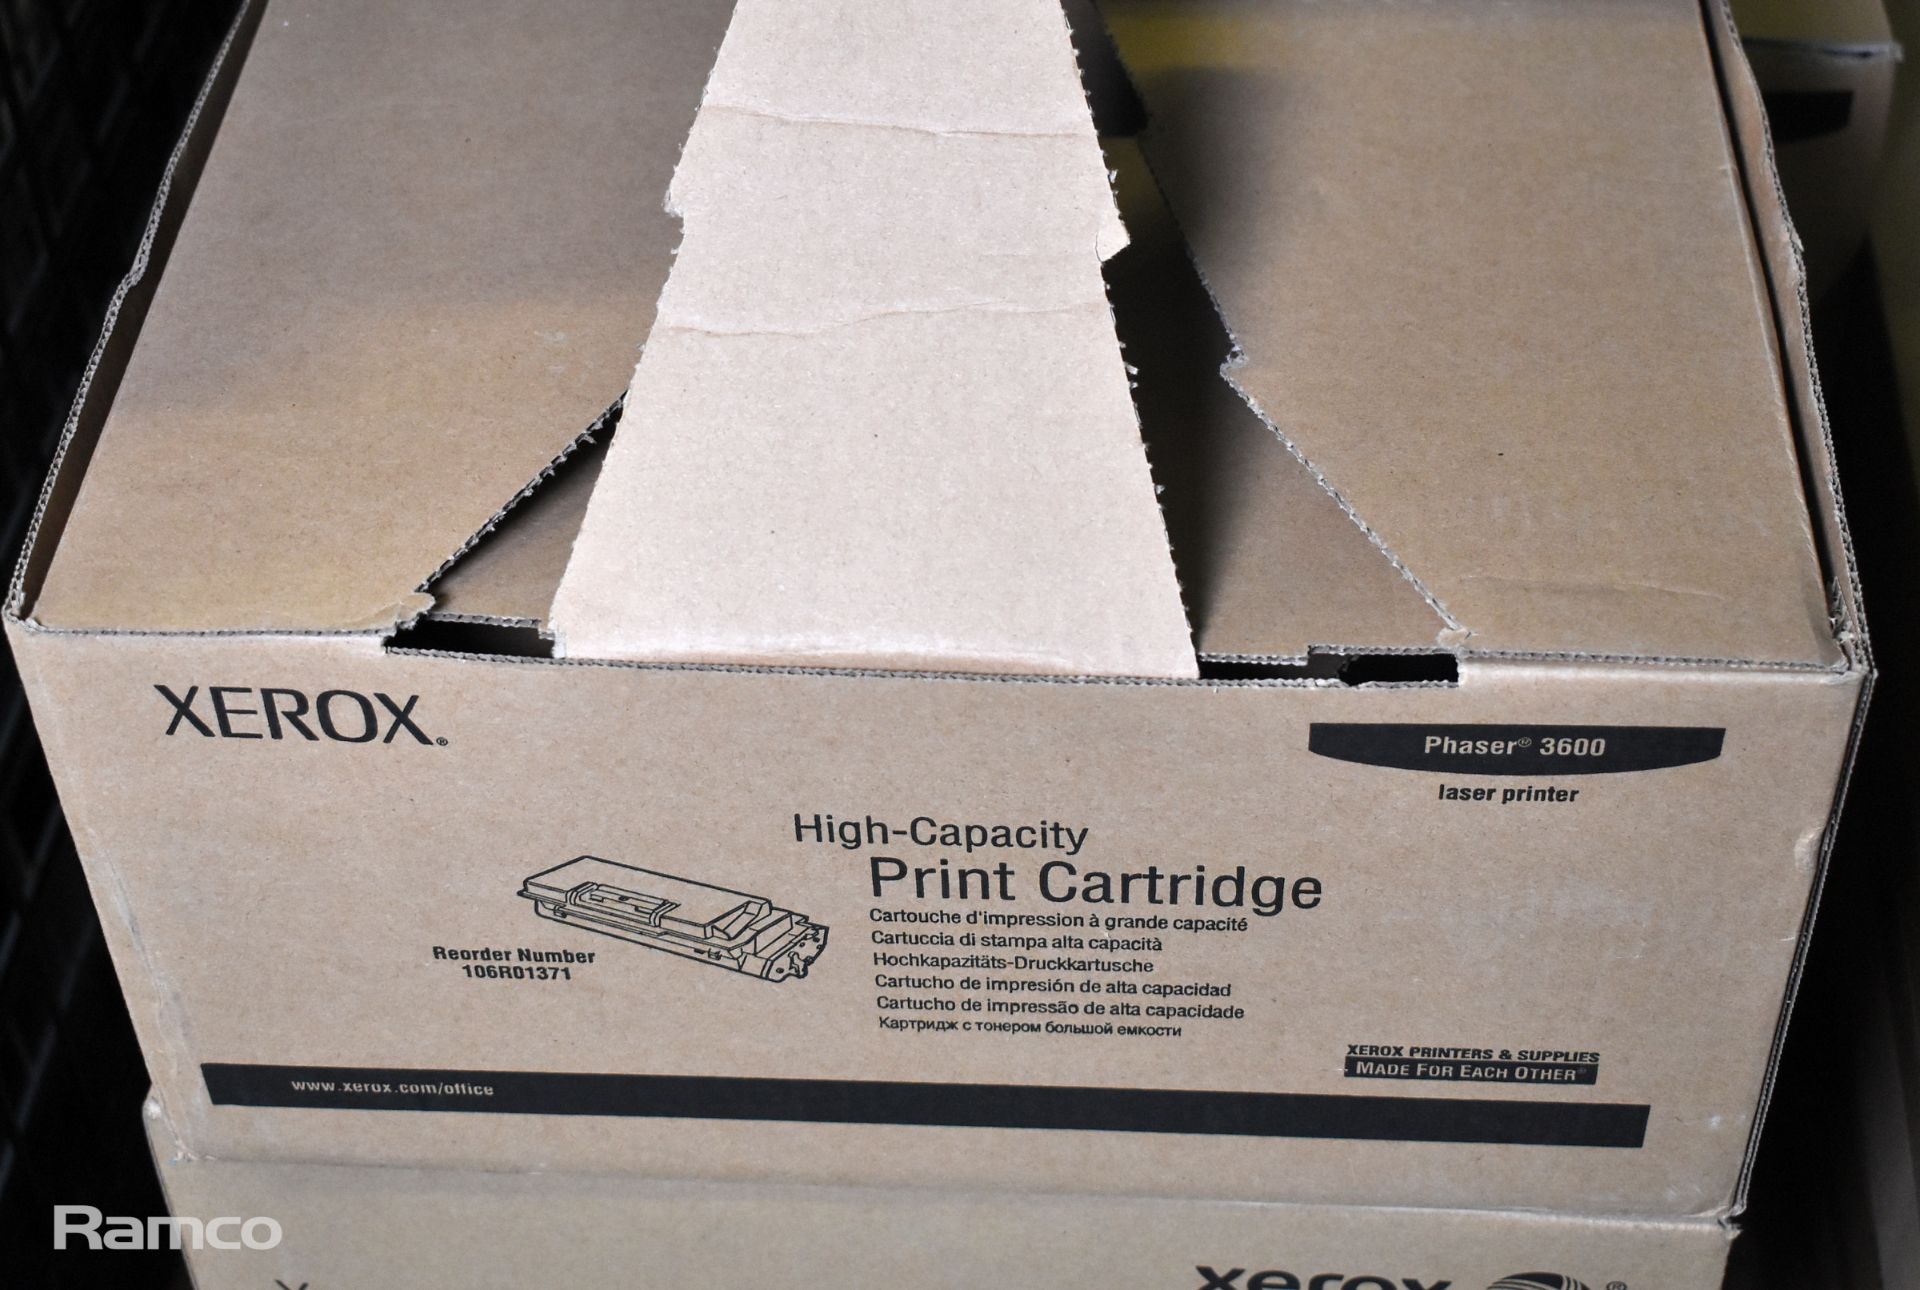 Xerox consumables - 220V phaser, print, toner & drum cartridges - 28 units in total - Image 3 of 6